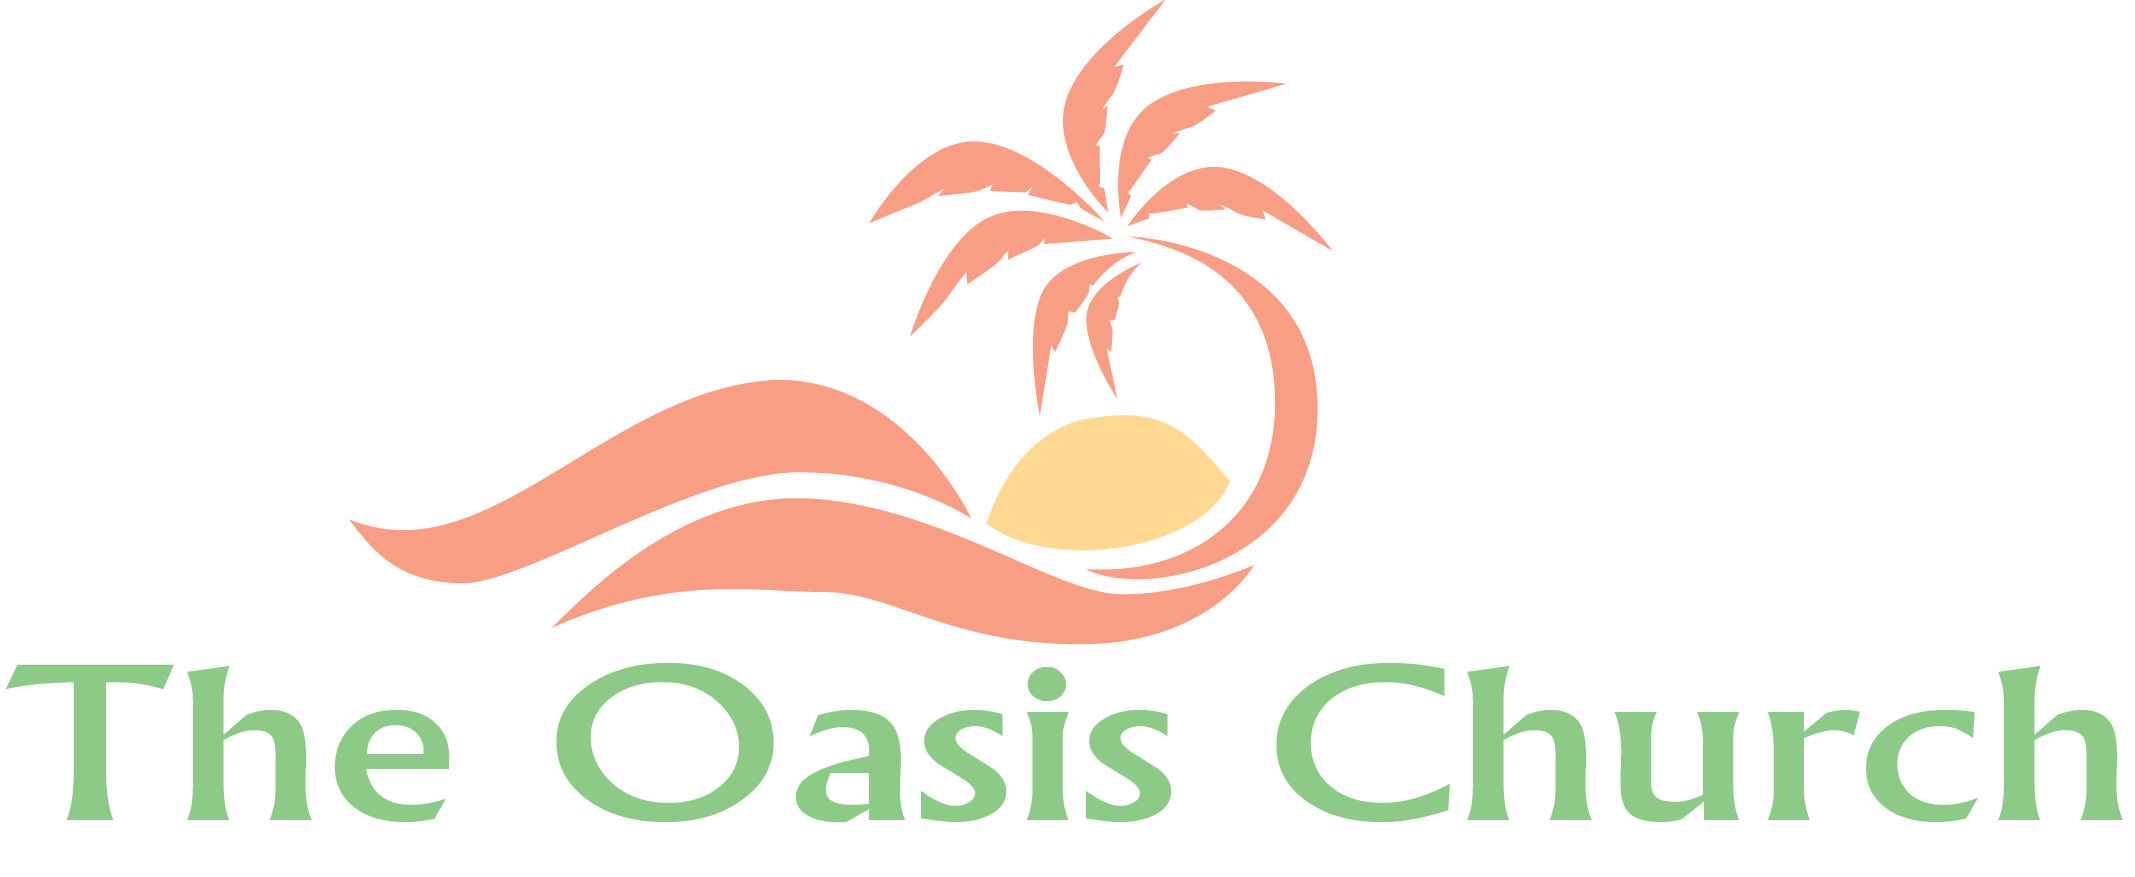 palm clipart oasis